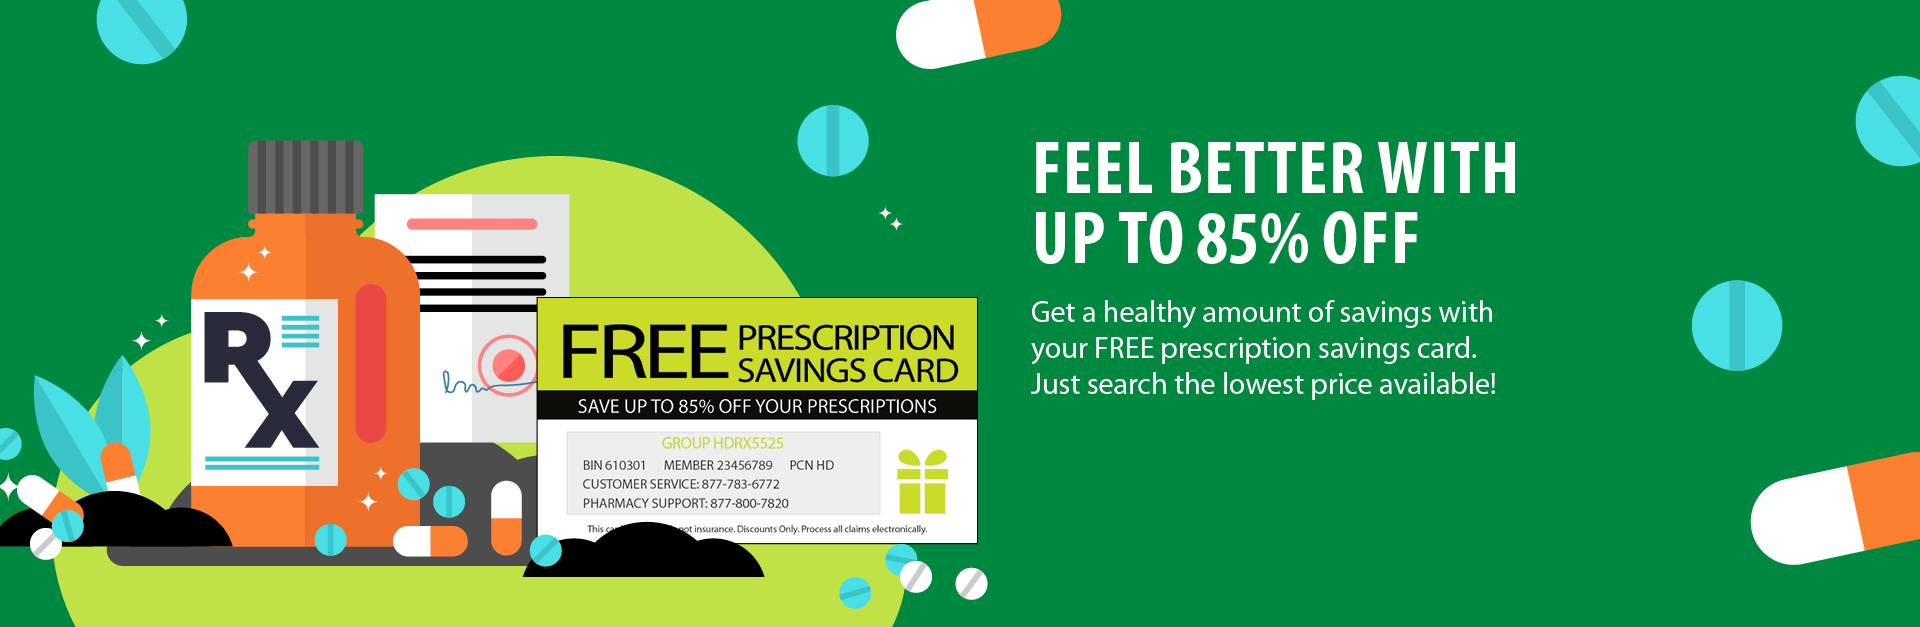 Start saving on your prescriptions today! Enjoy your free prescription savings card as one of your instant savings benefits by Rewards. It can be used by everyone in your household, including pets!